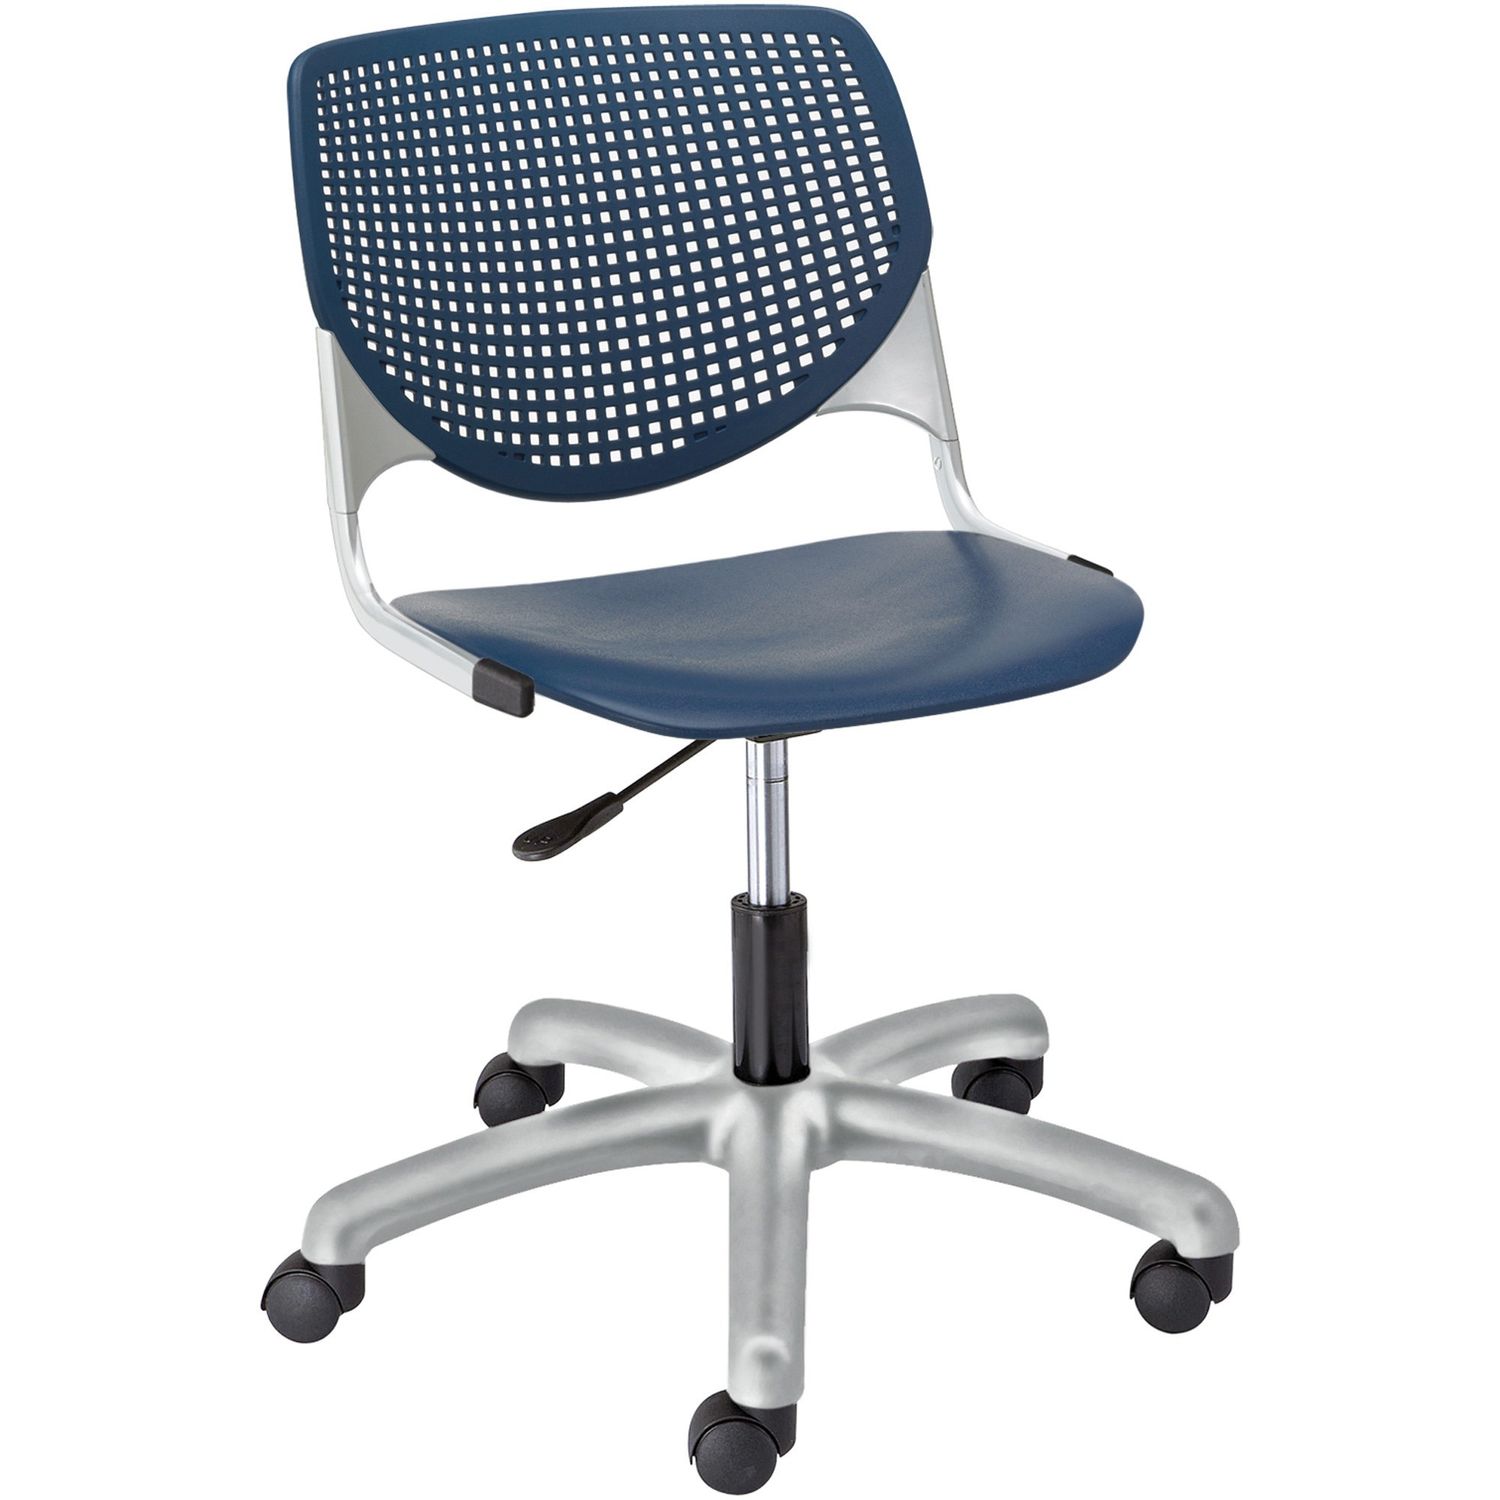 Kool Task Chair with Perforated Back Navy Polypropylene Seat, Navy Polypropylene Back, Powder Coated Silver Steel Frame, 5-star Base, 1 Each